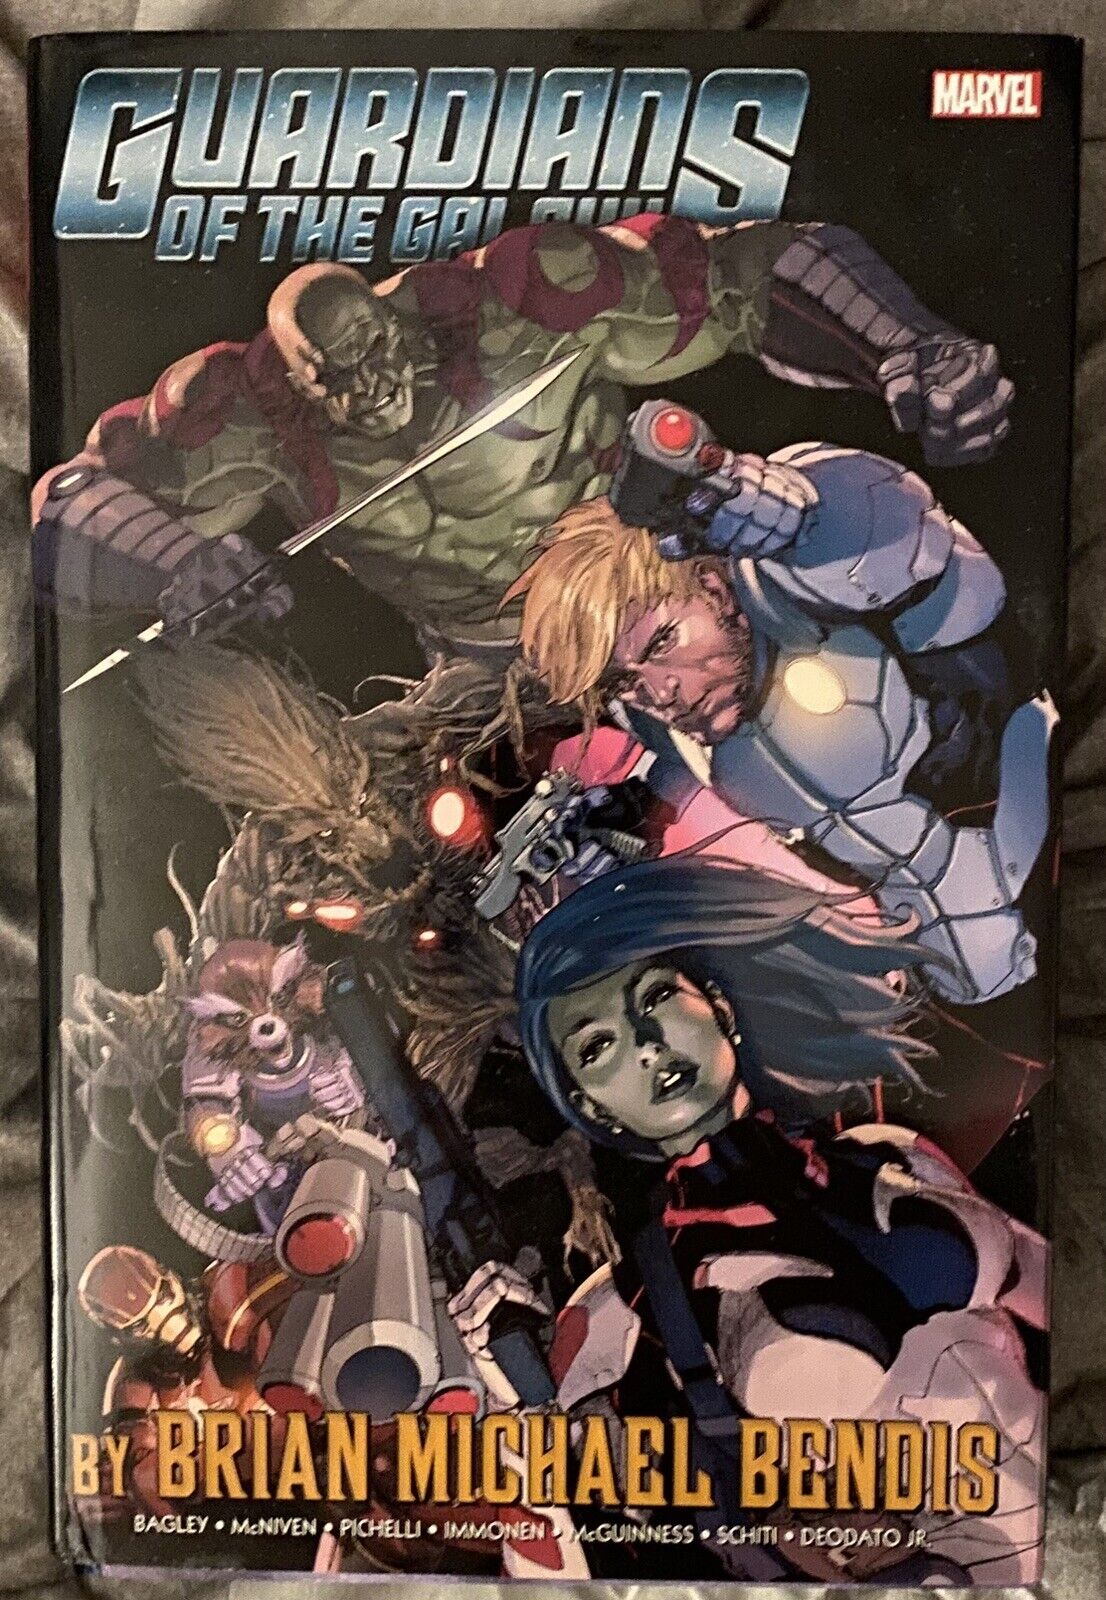 Guardians of the Galaxy Omnibus Vol. 1 by Brian Michael Bendis